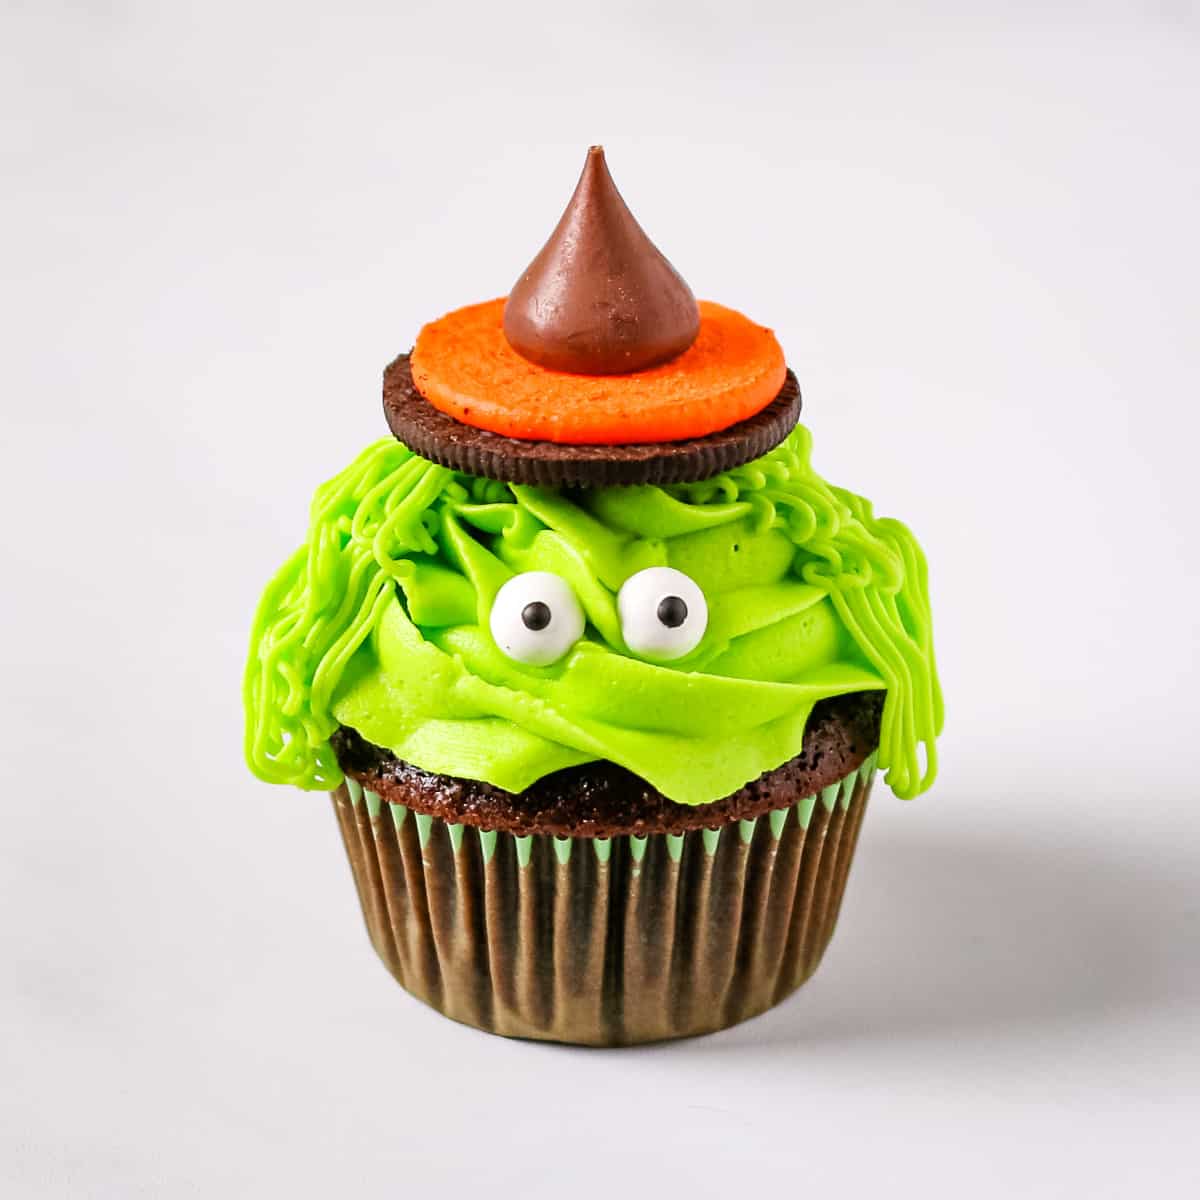 A chocolate cupcake decorated as a green Halloween witch.